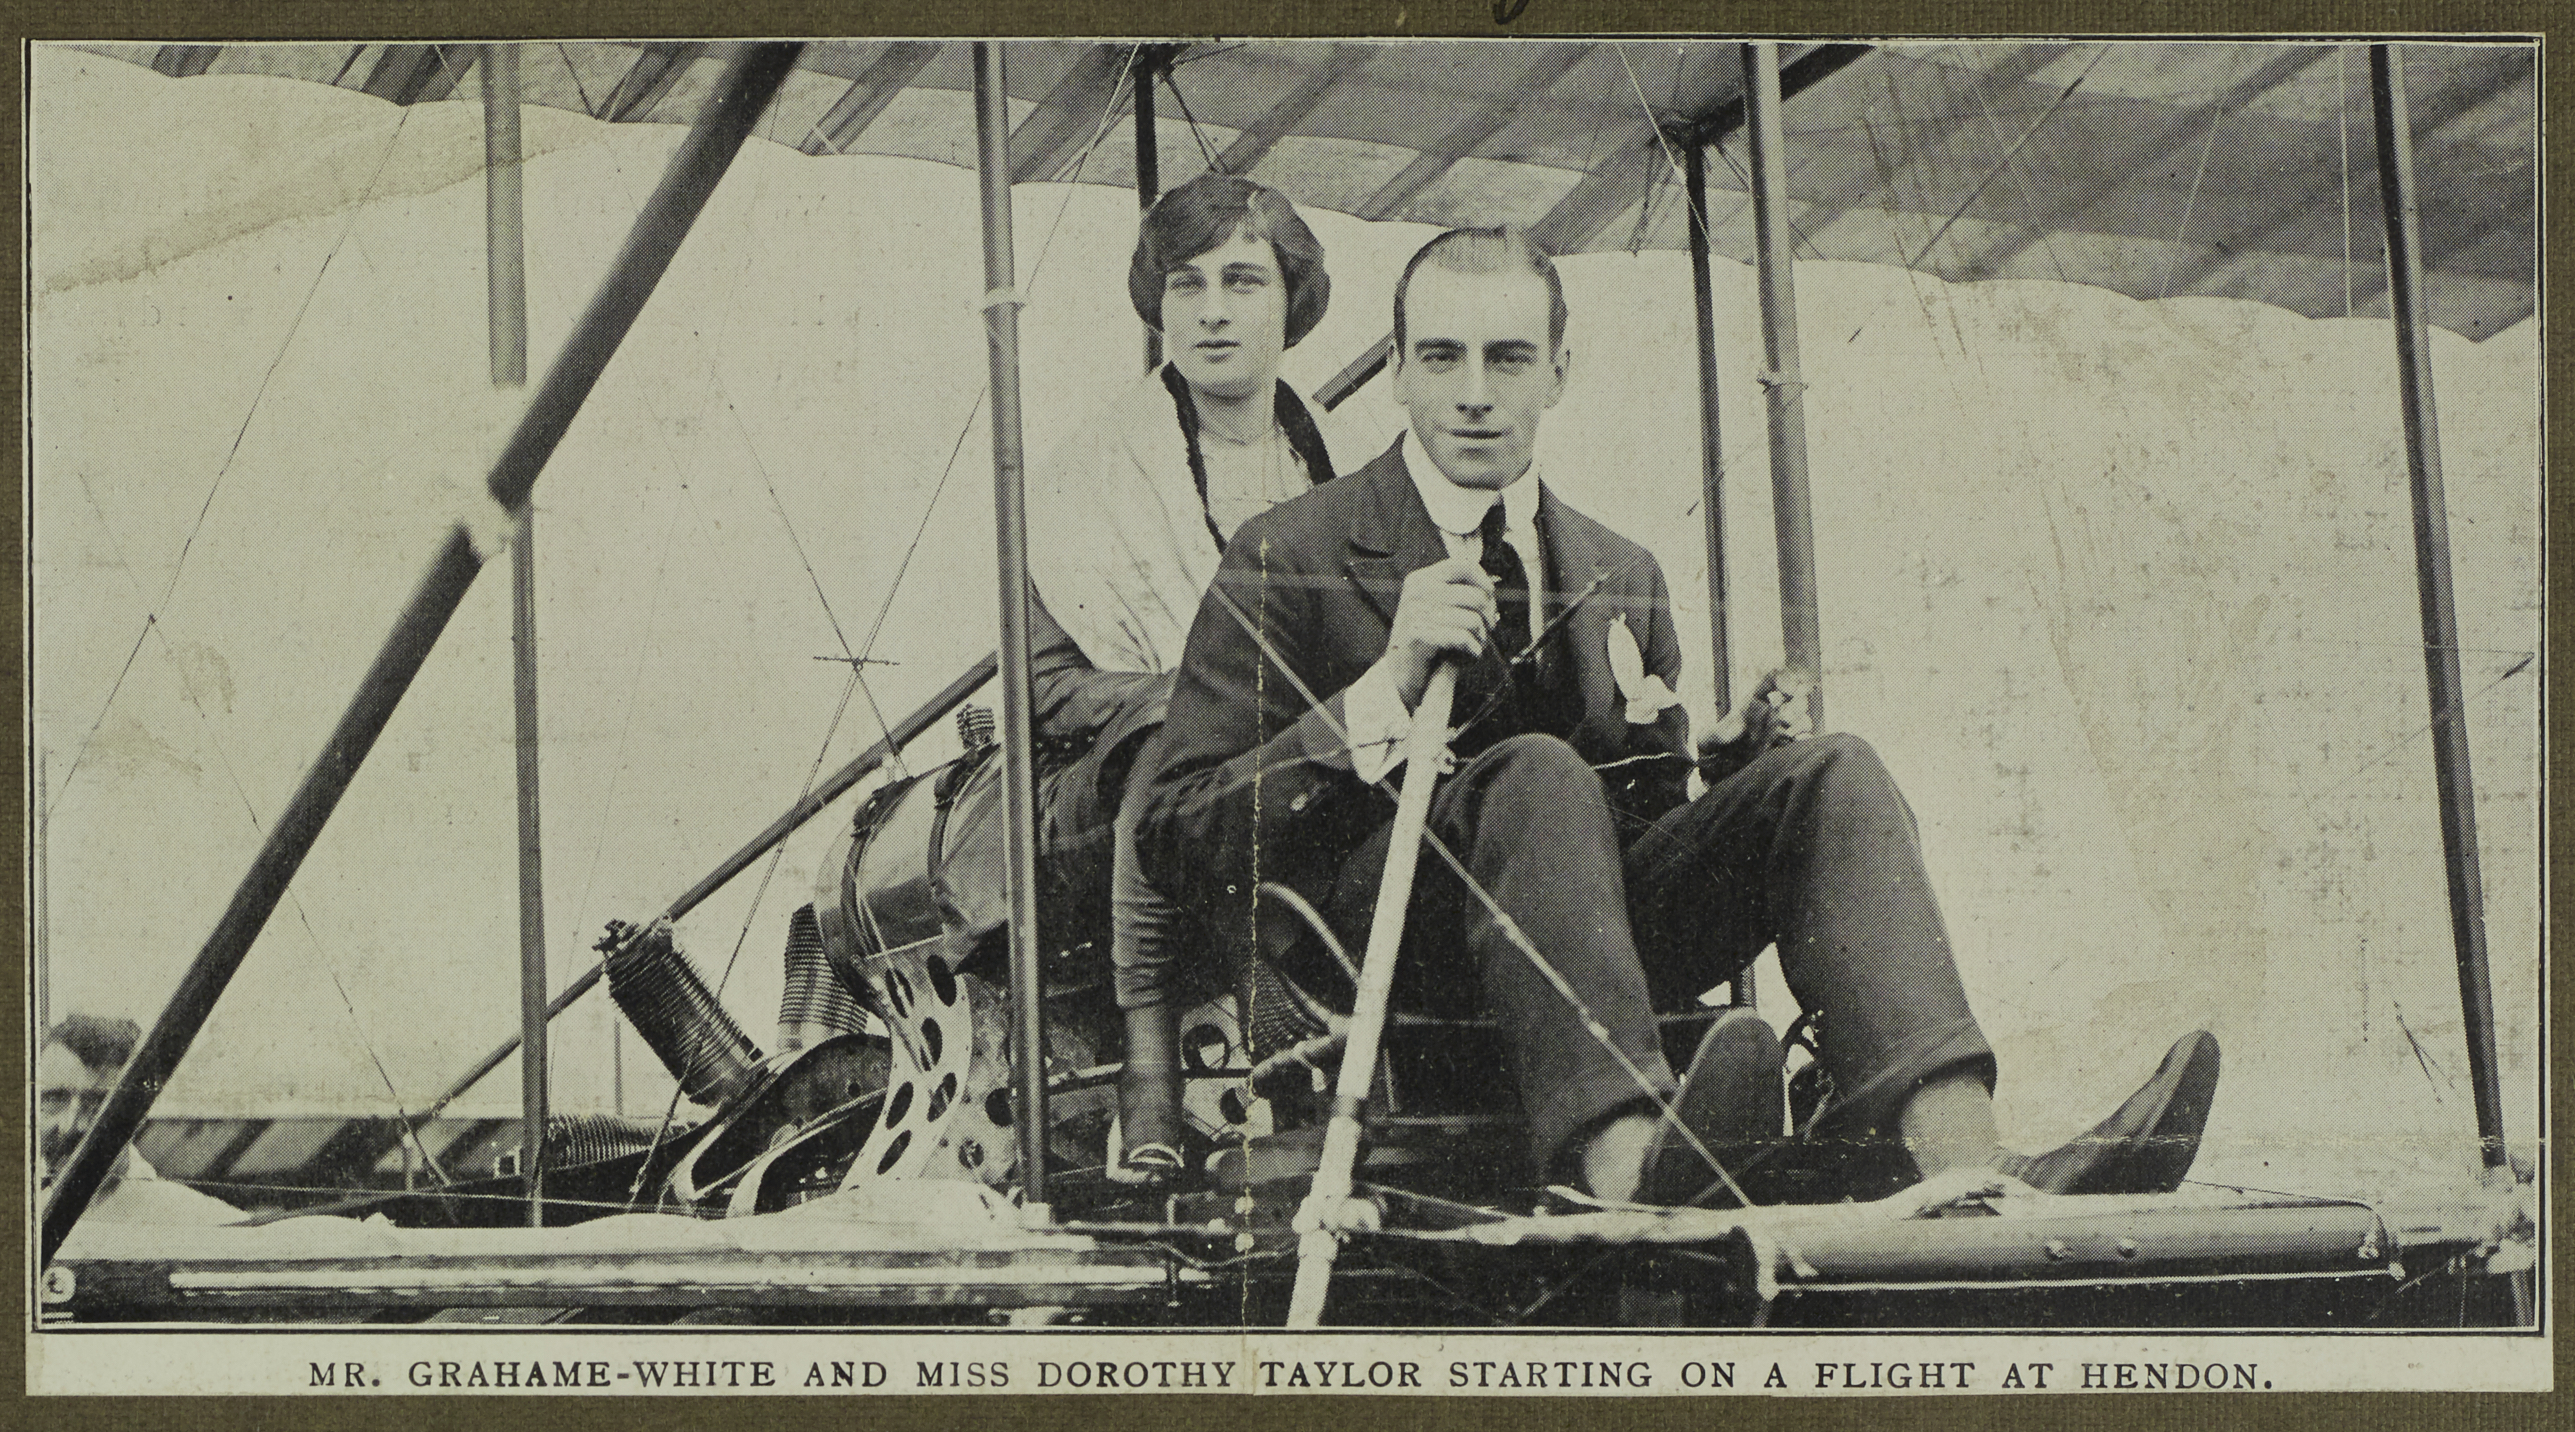 Black and white photograph of a man (Mr Grahame-White at the front) and woman, Miss Dorothy Taylor sitting in a biplane. The man is wearing a suit and tie and the woman is wearing a dress or skirt and shawl.